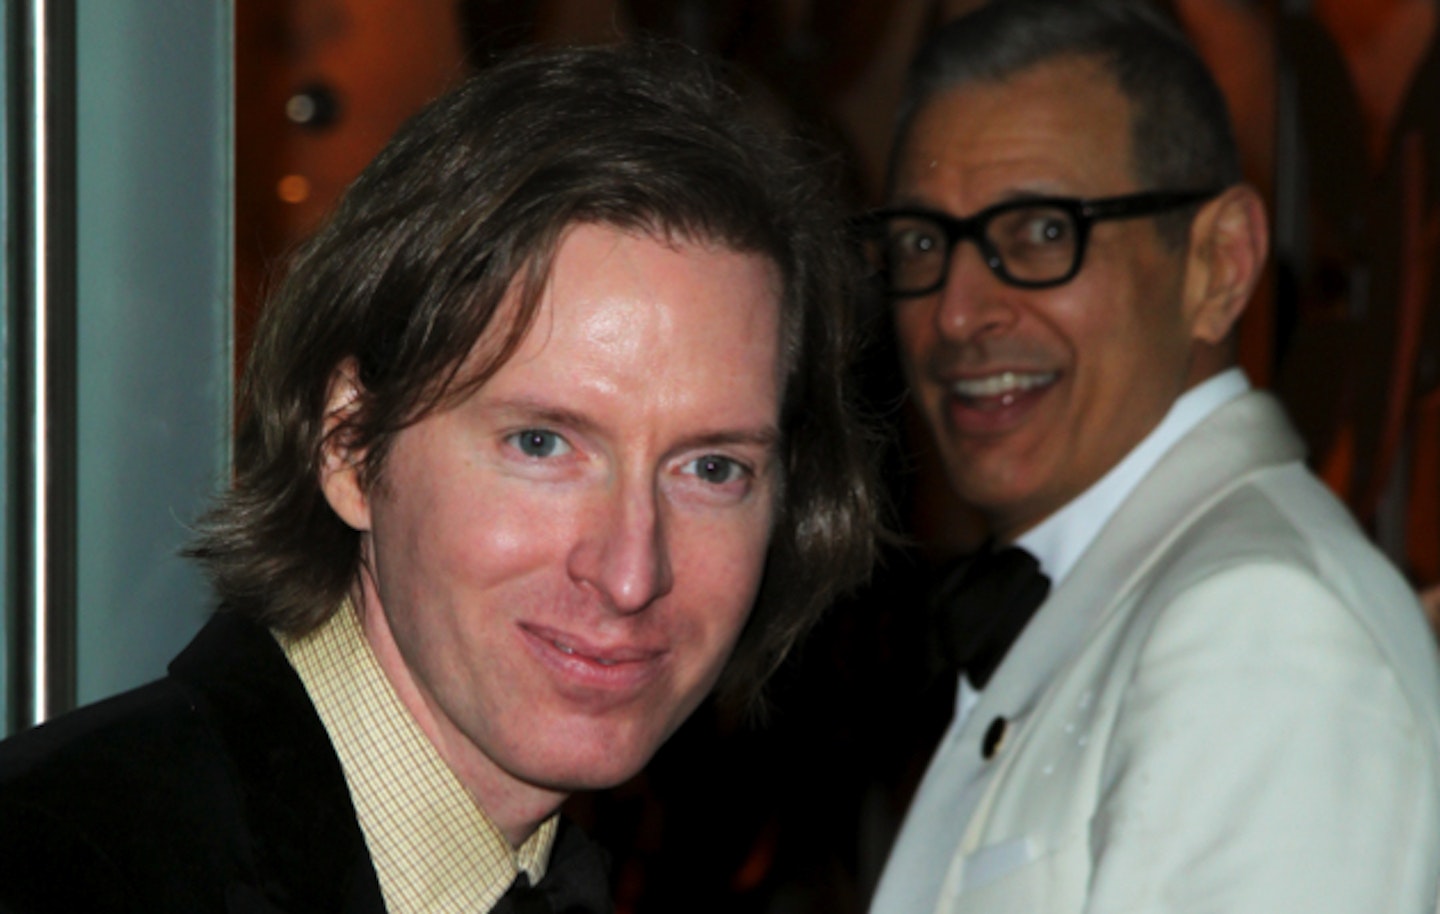 Wes-Anderson-casts-new-animated-movie